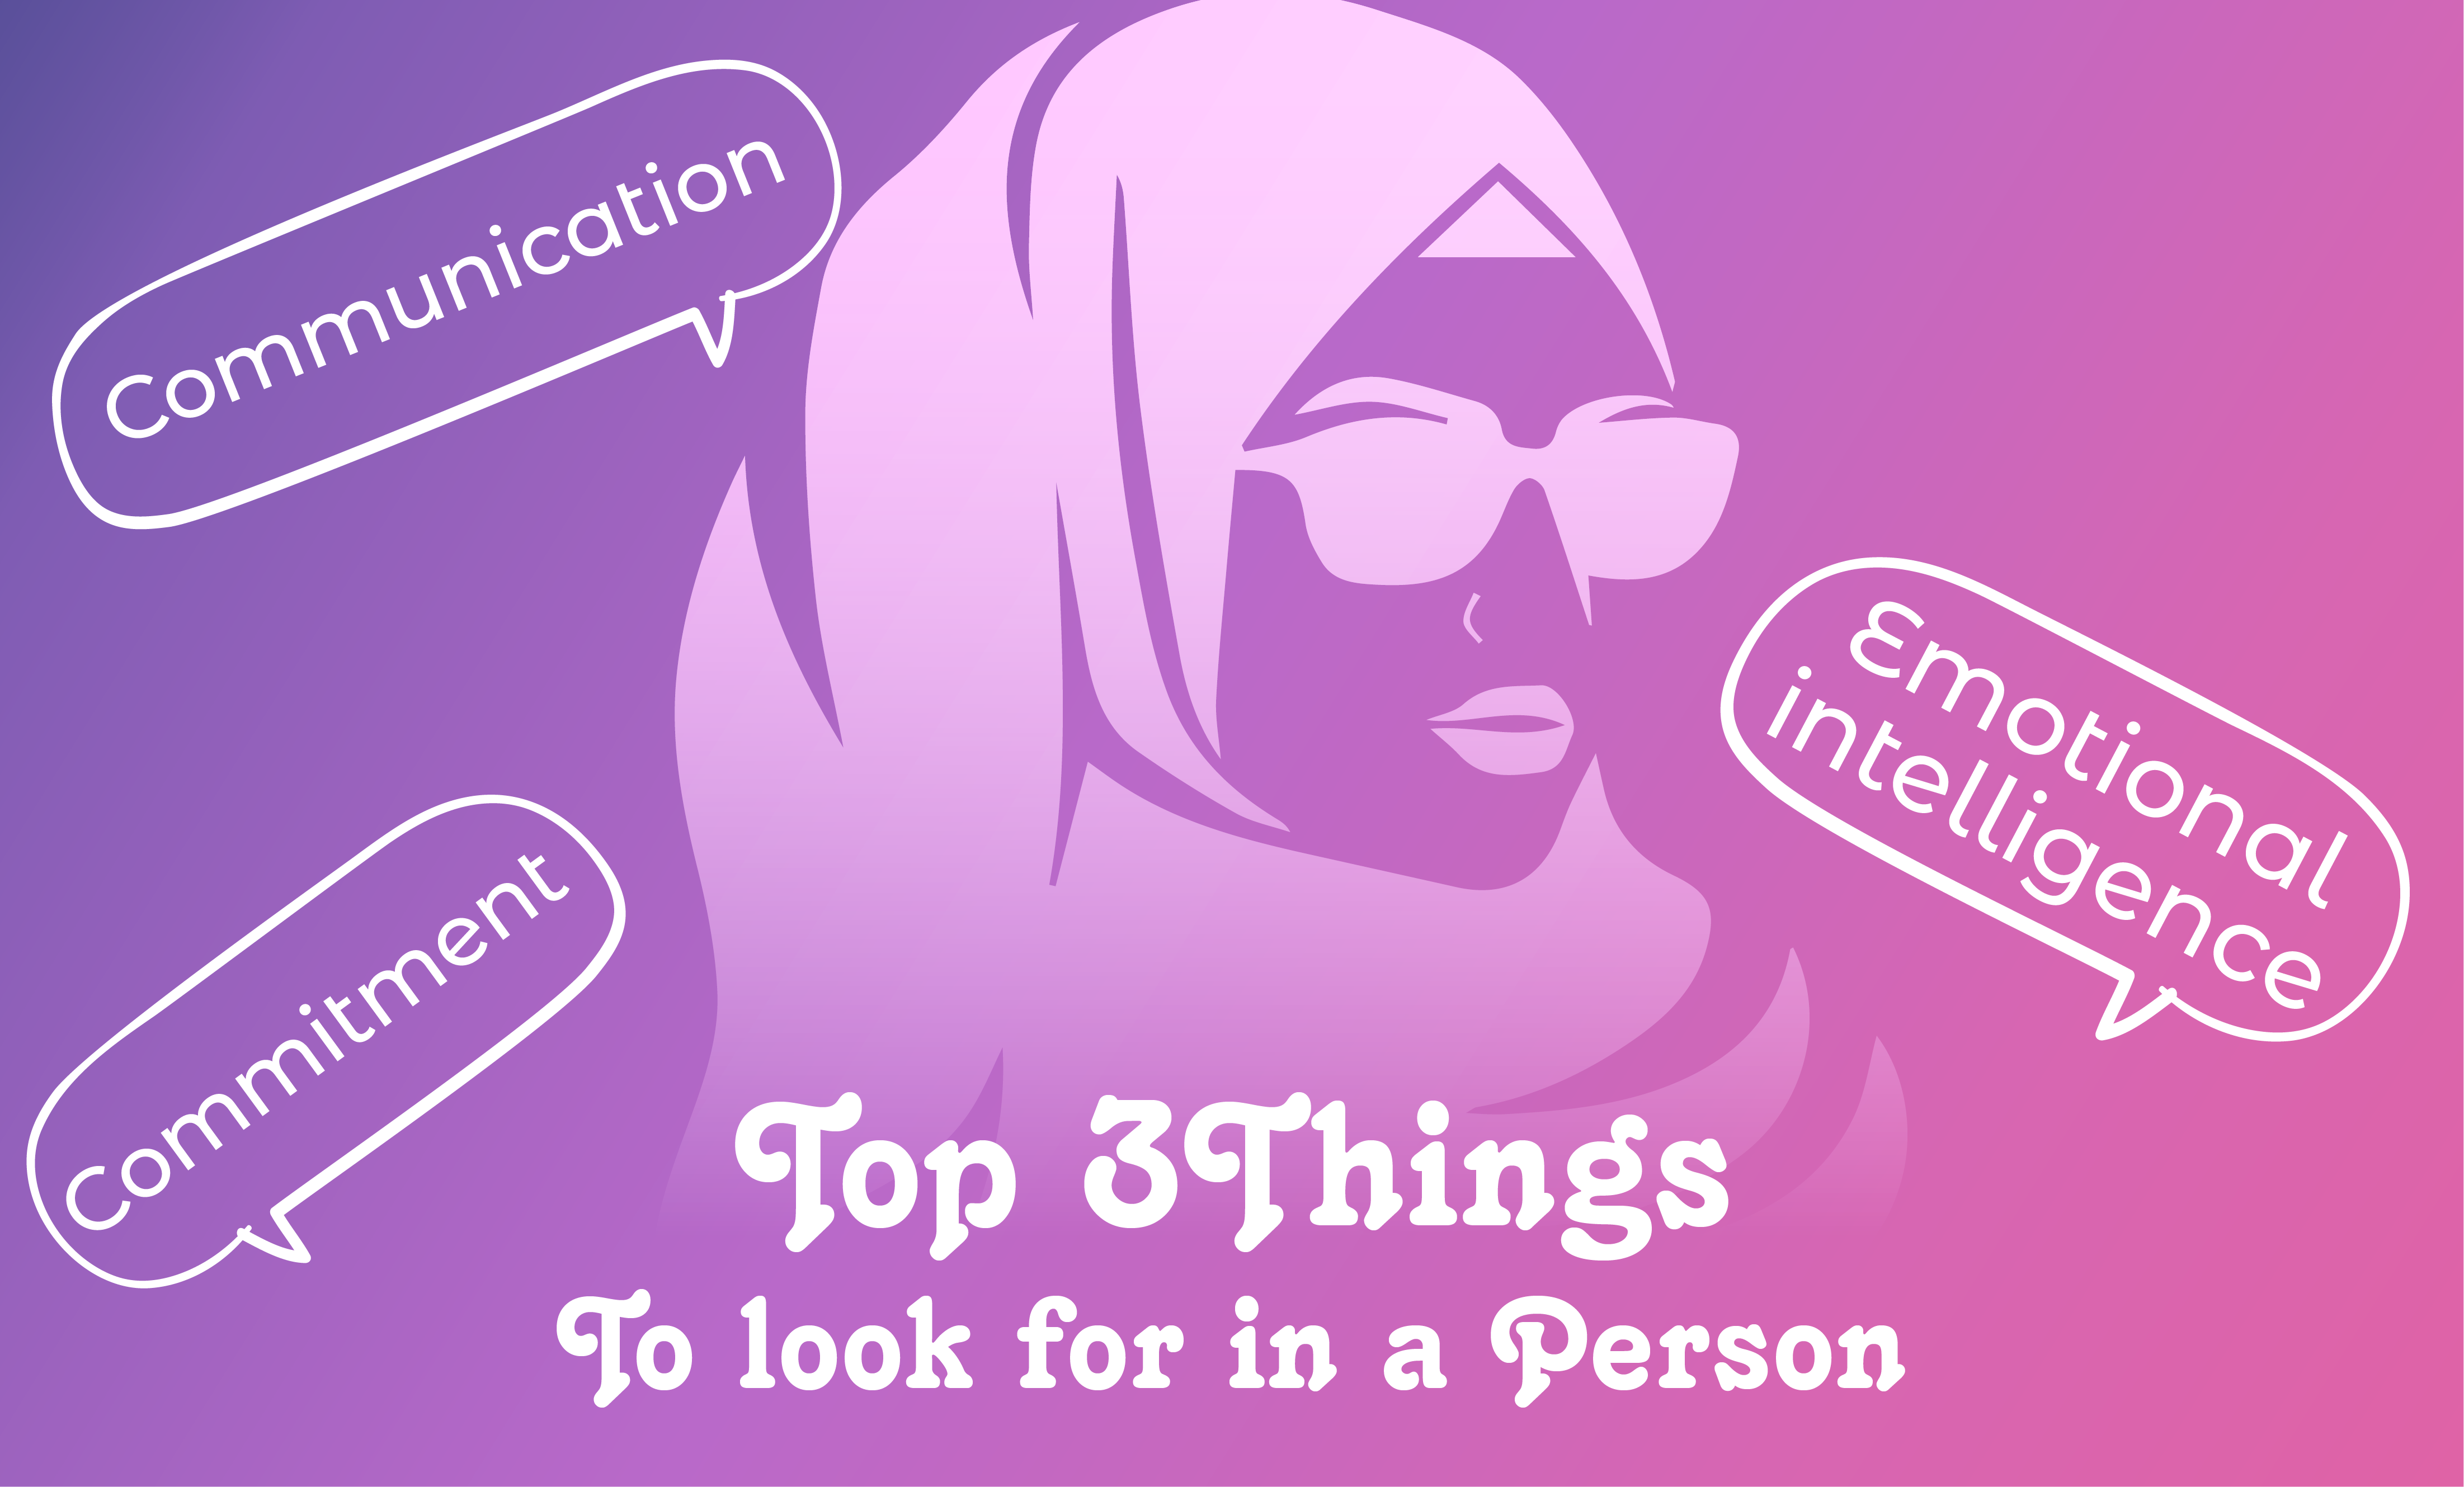 Top 3 things to look for in a person